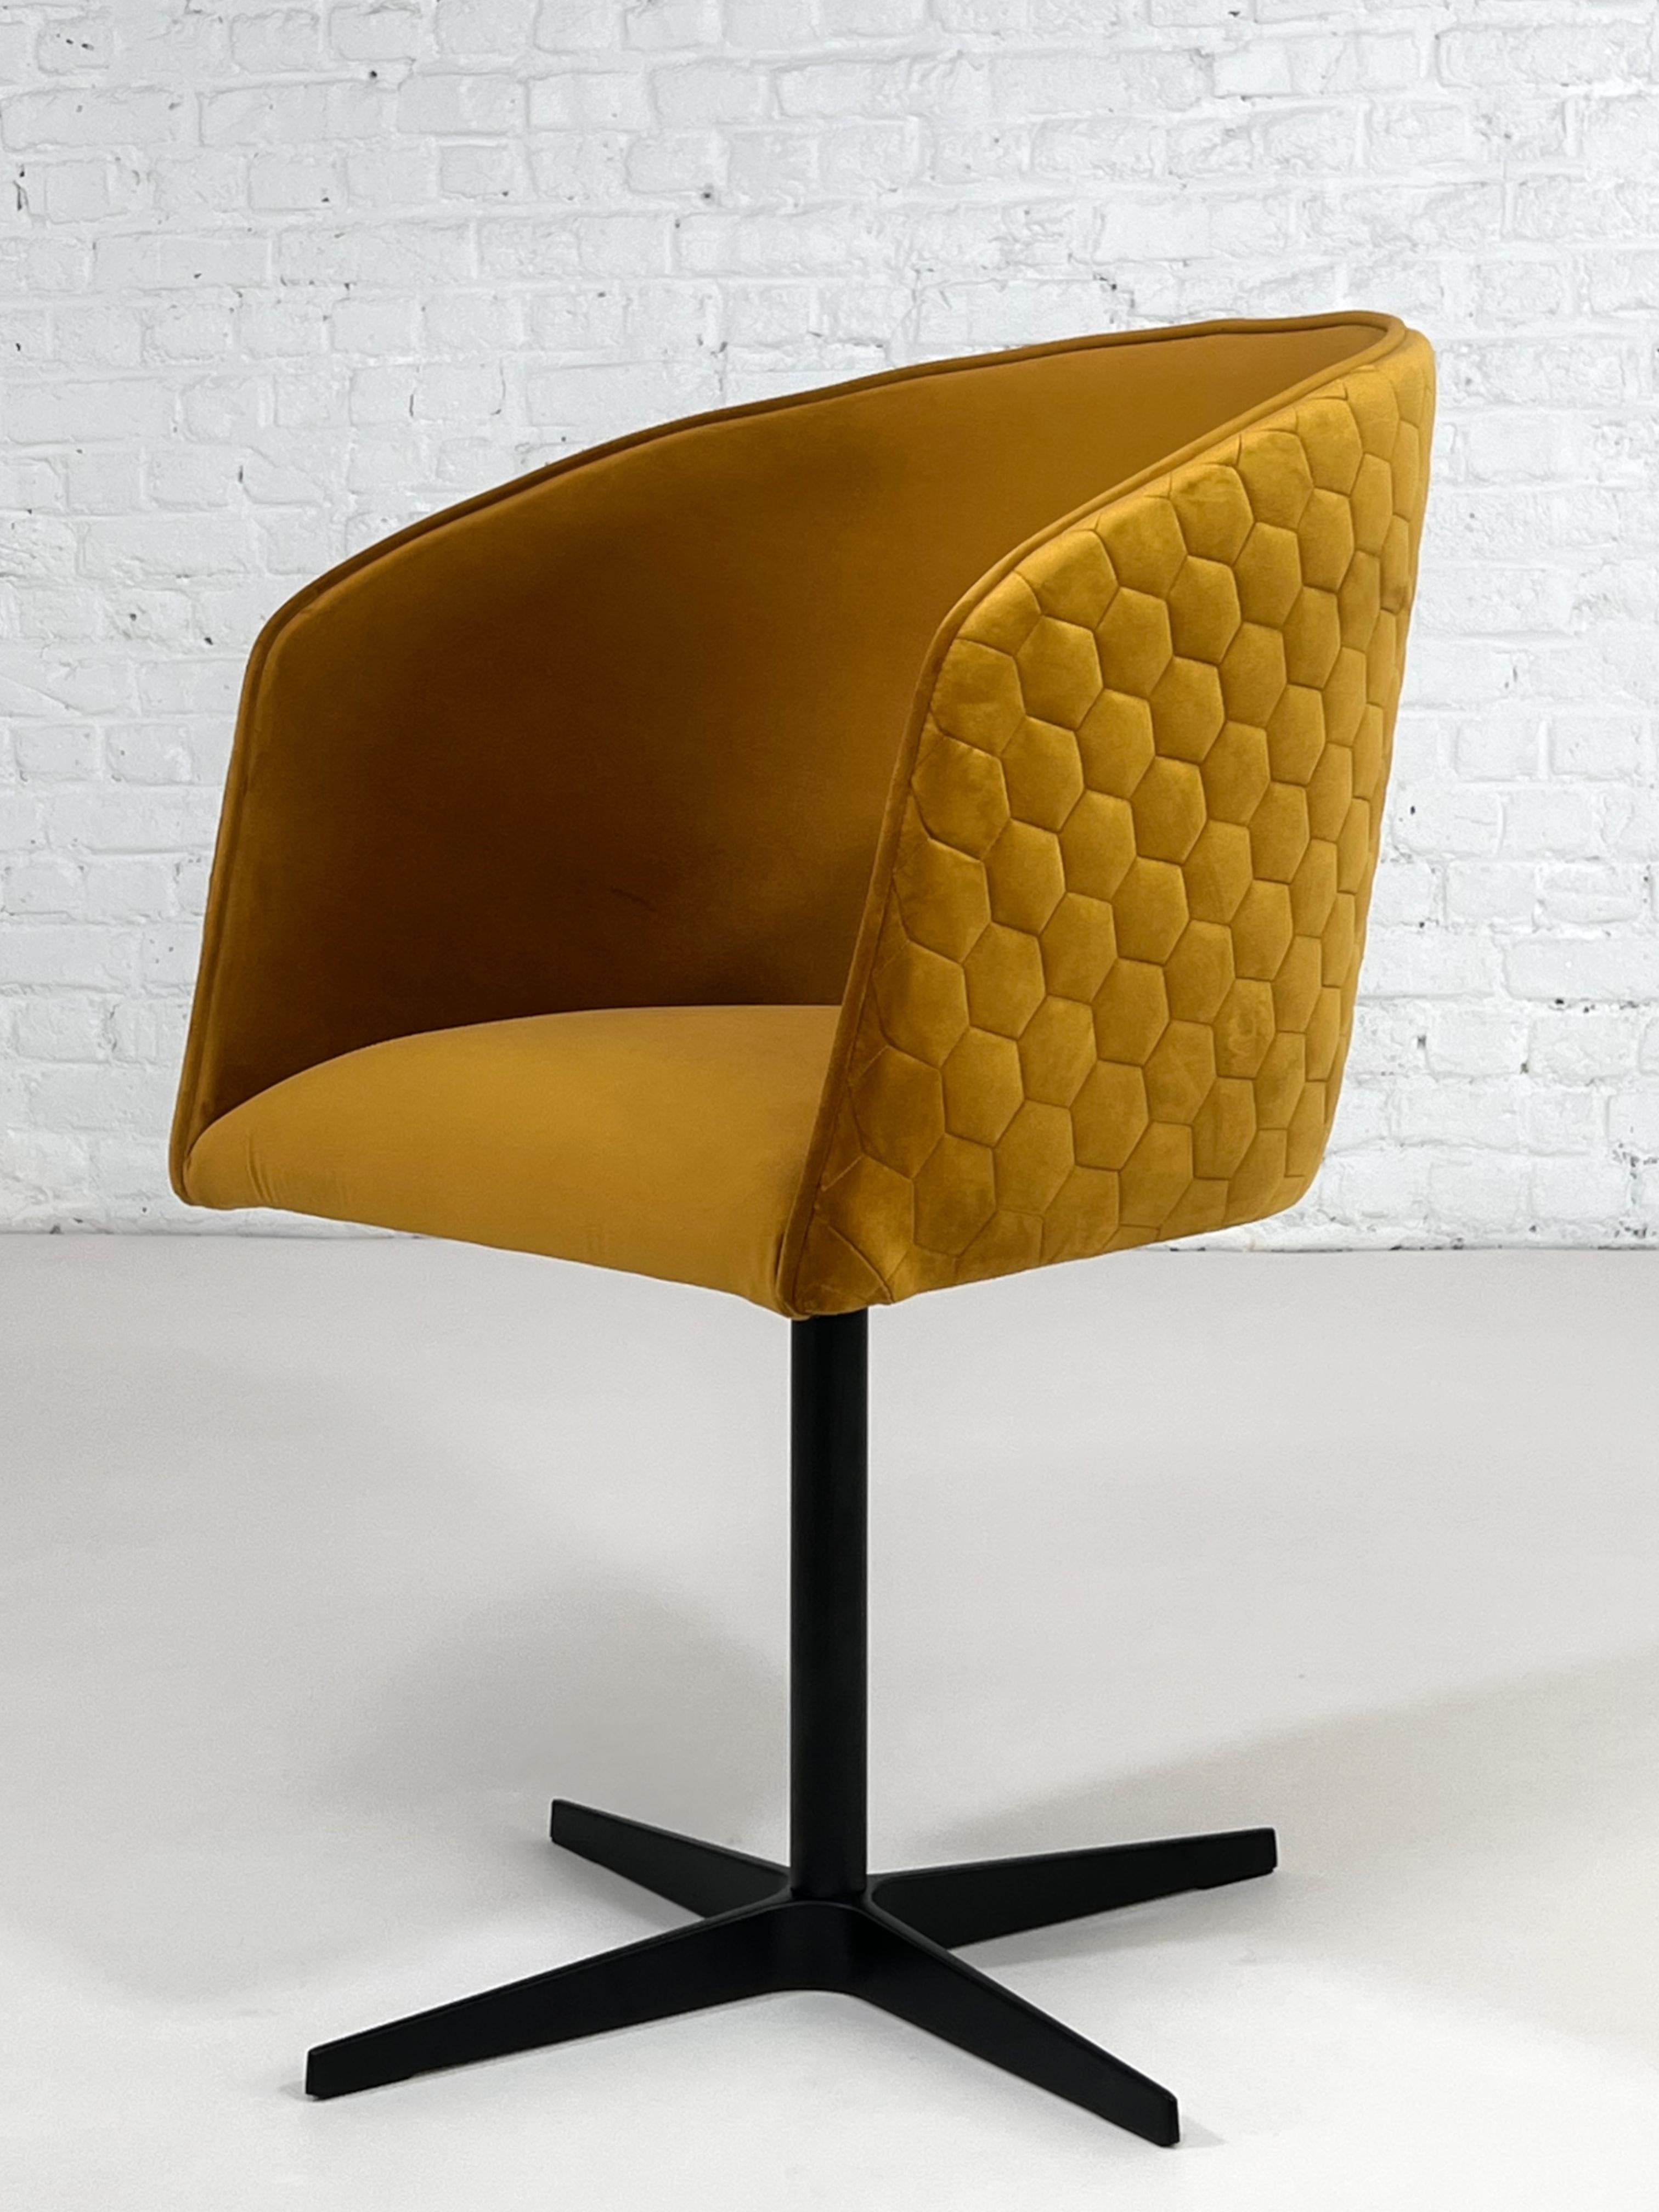 1950s MCM Design Style Ocre Velvet Fabric With Black Lacquered Swivel Base Armchair composed of a black lacquered cross metal feet swivel system and a comfy seat in a ocre velvet seat with matchind velvet padded back.